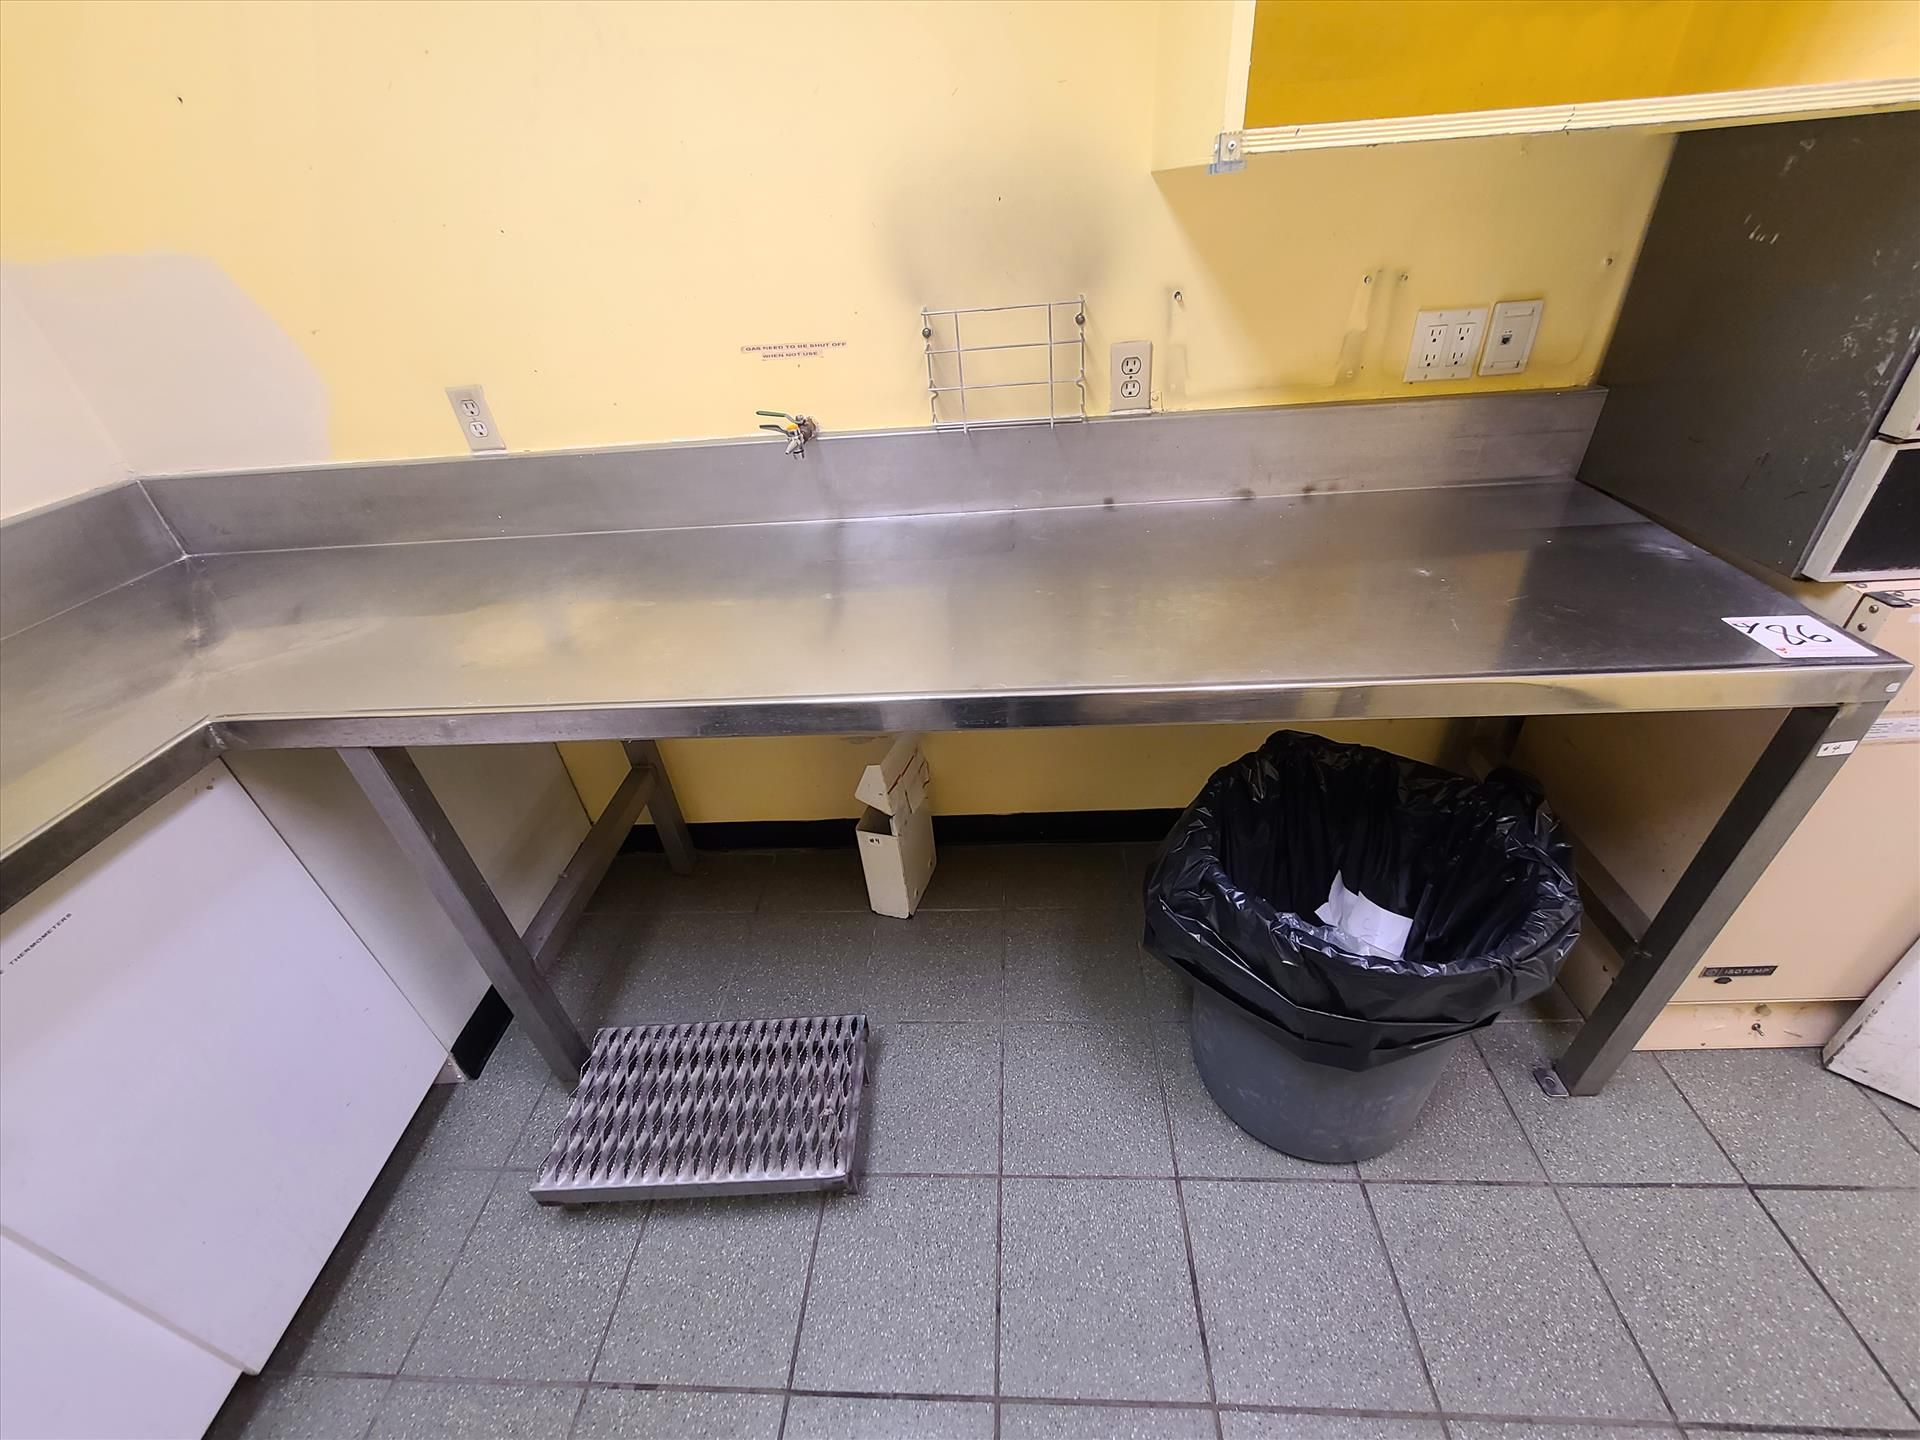 counter, stainless steel, approx. 28 in. x 22 ft. w/ sink [Loc. Lab] - Image 3 of 4